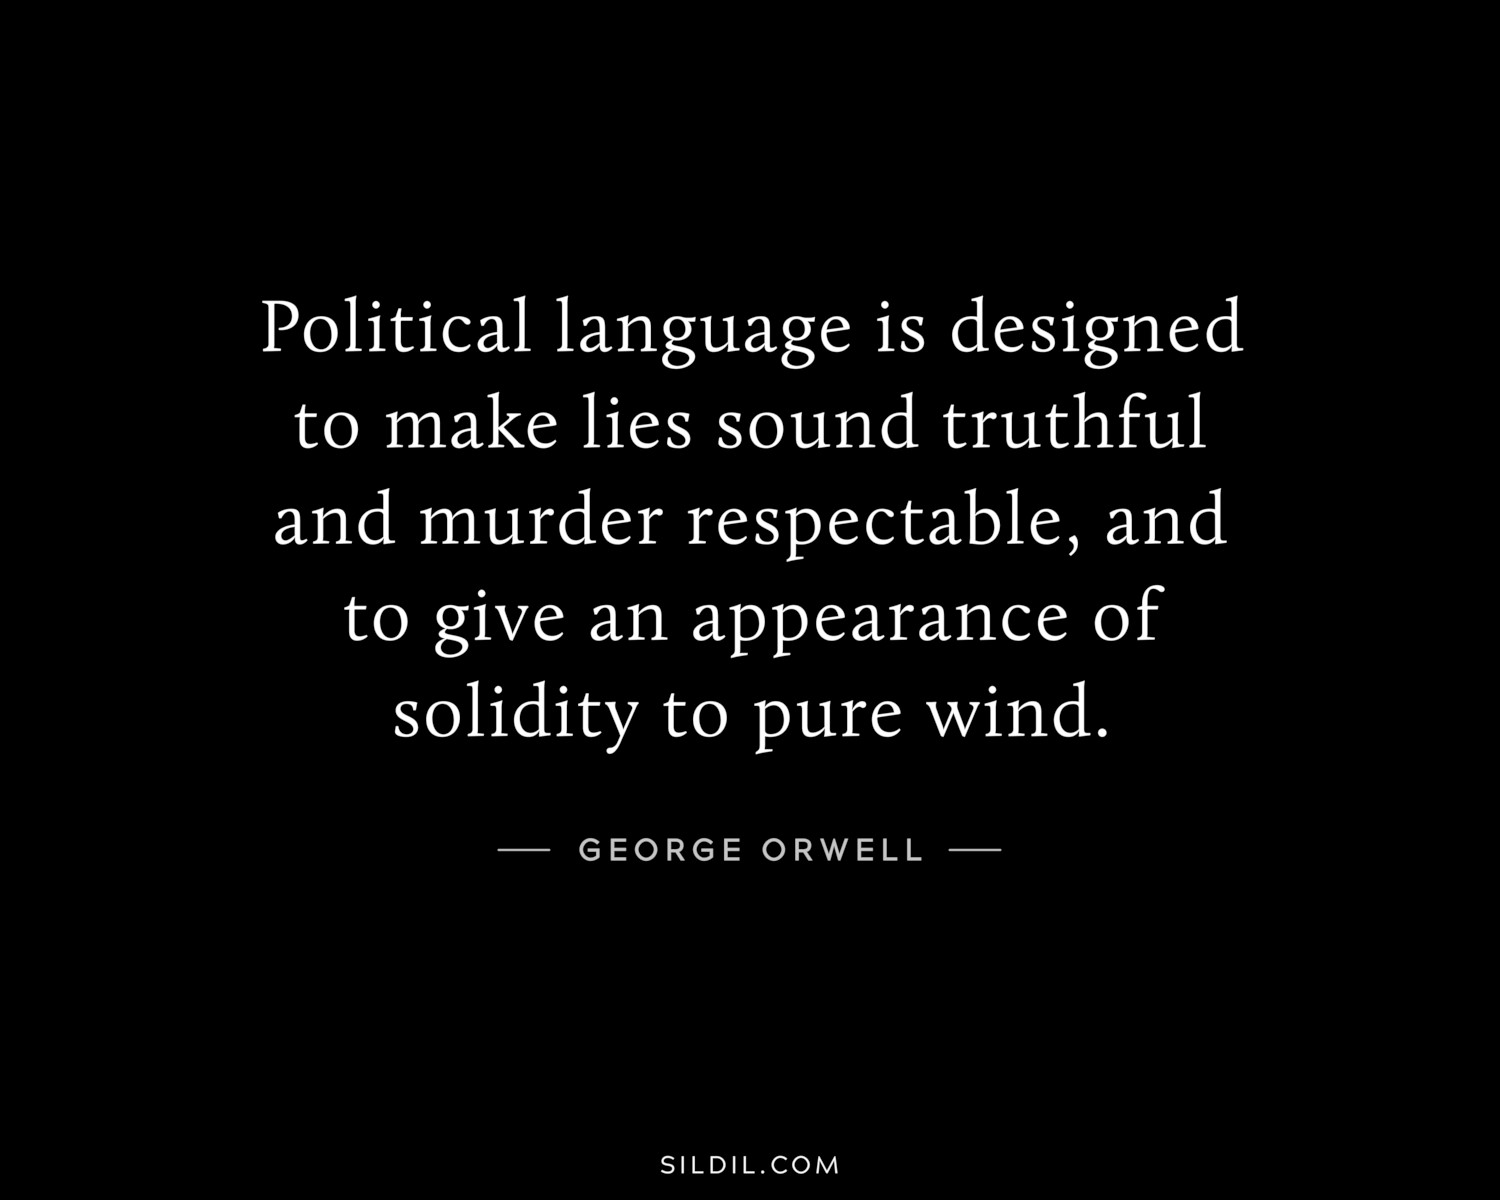 Political language is designed to make lies sound truthful and murder respectable, and to give an appearance of solidity to pure wind.